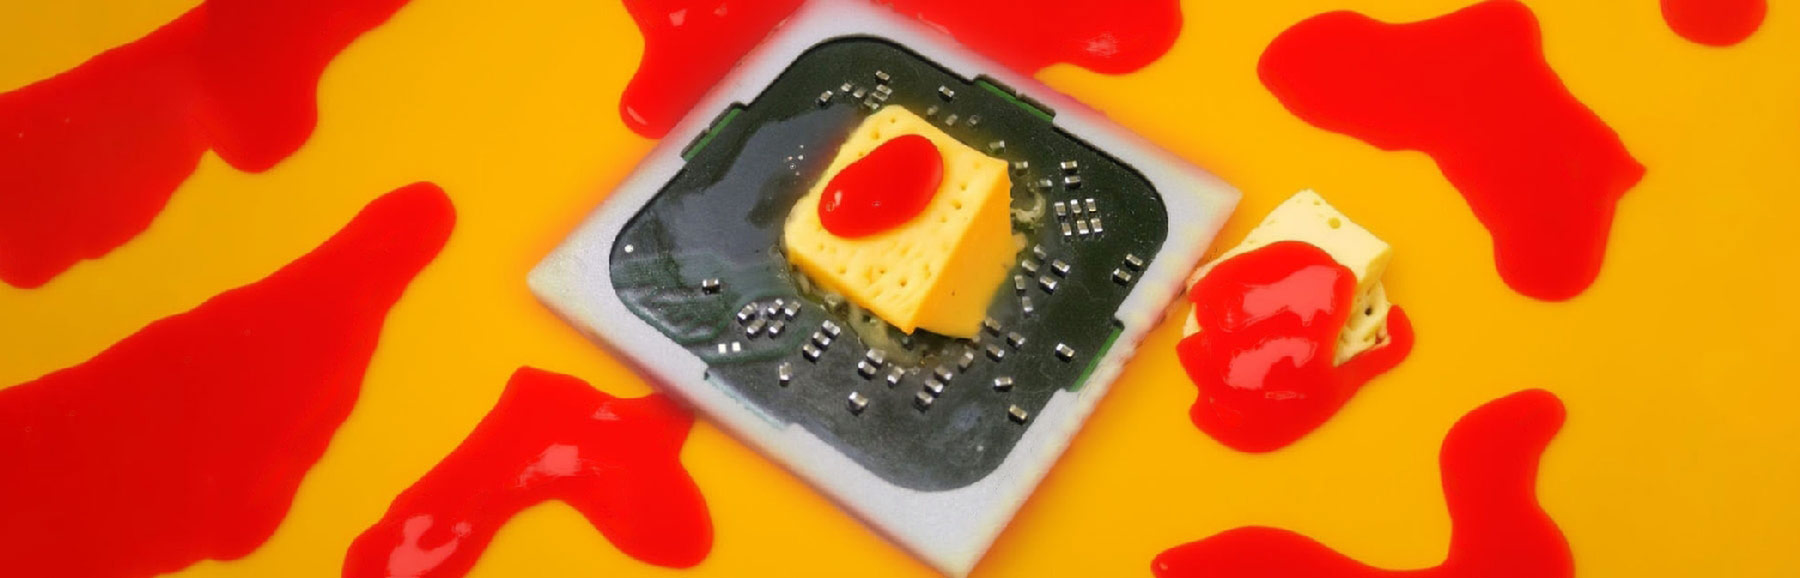 Ketchup is a better thermal conductor than toothpaste, according to a computer study